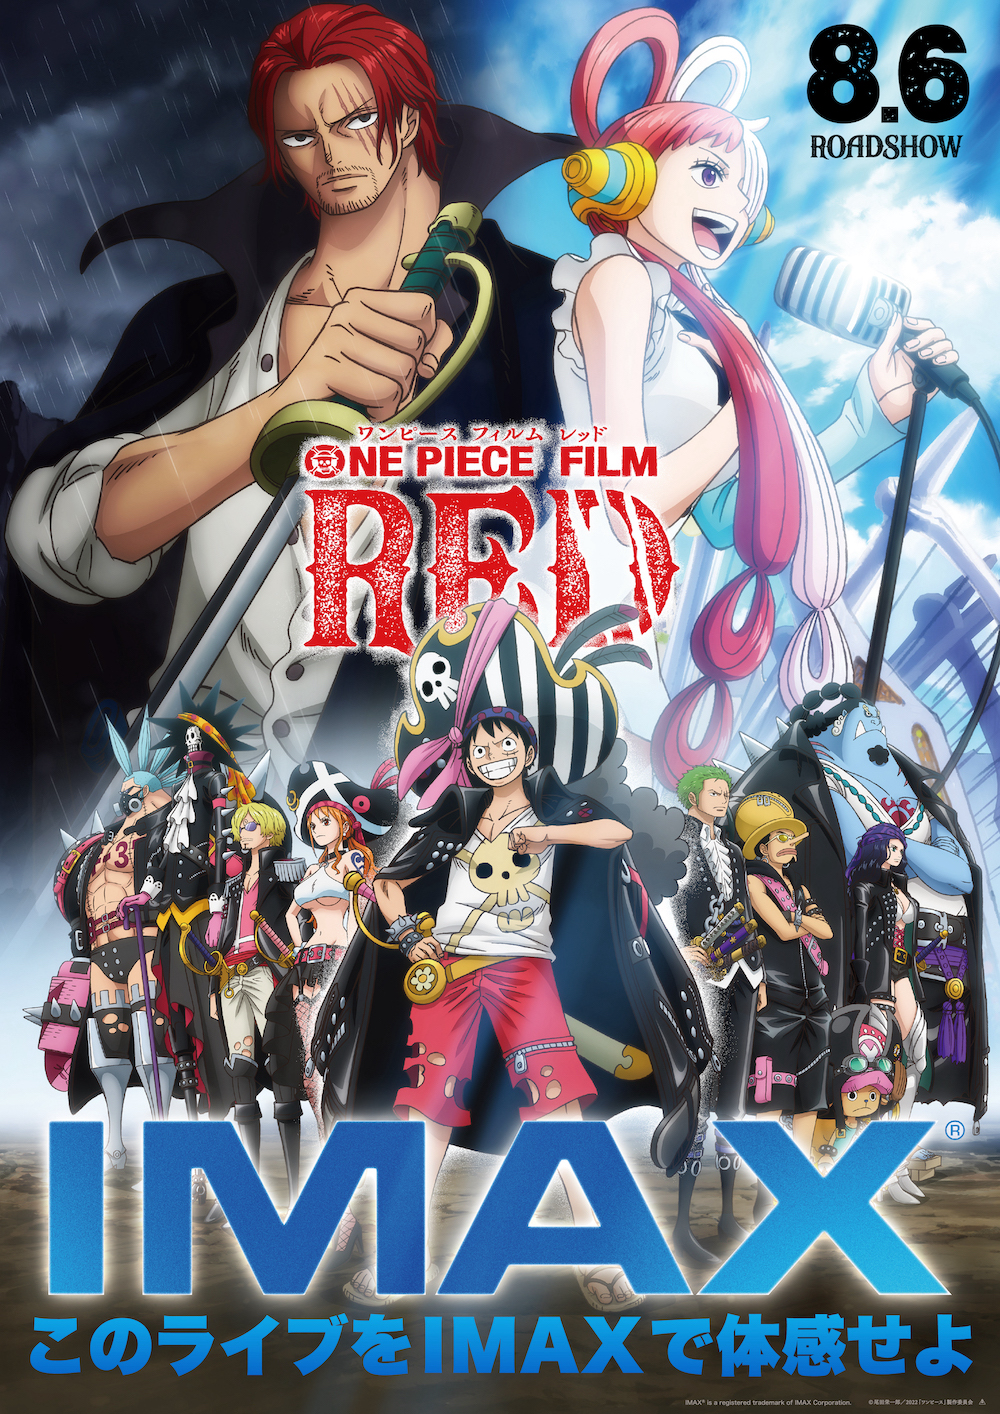 OROJAPAN on X: Some news informations about One Piece: Film Red